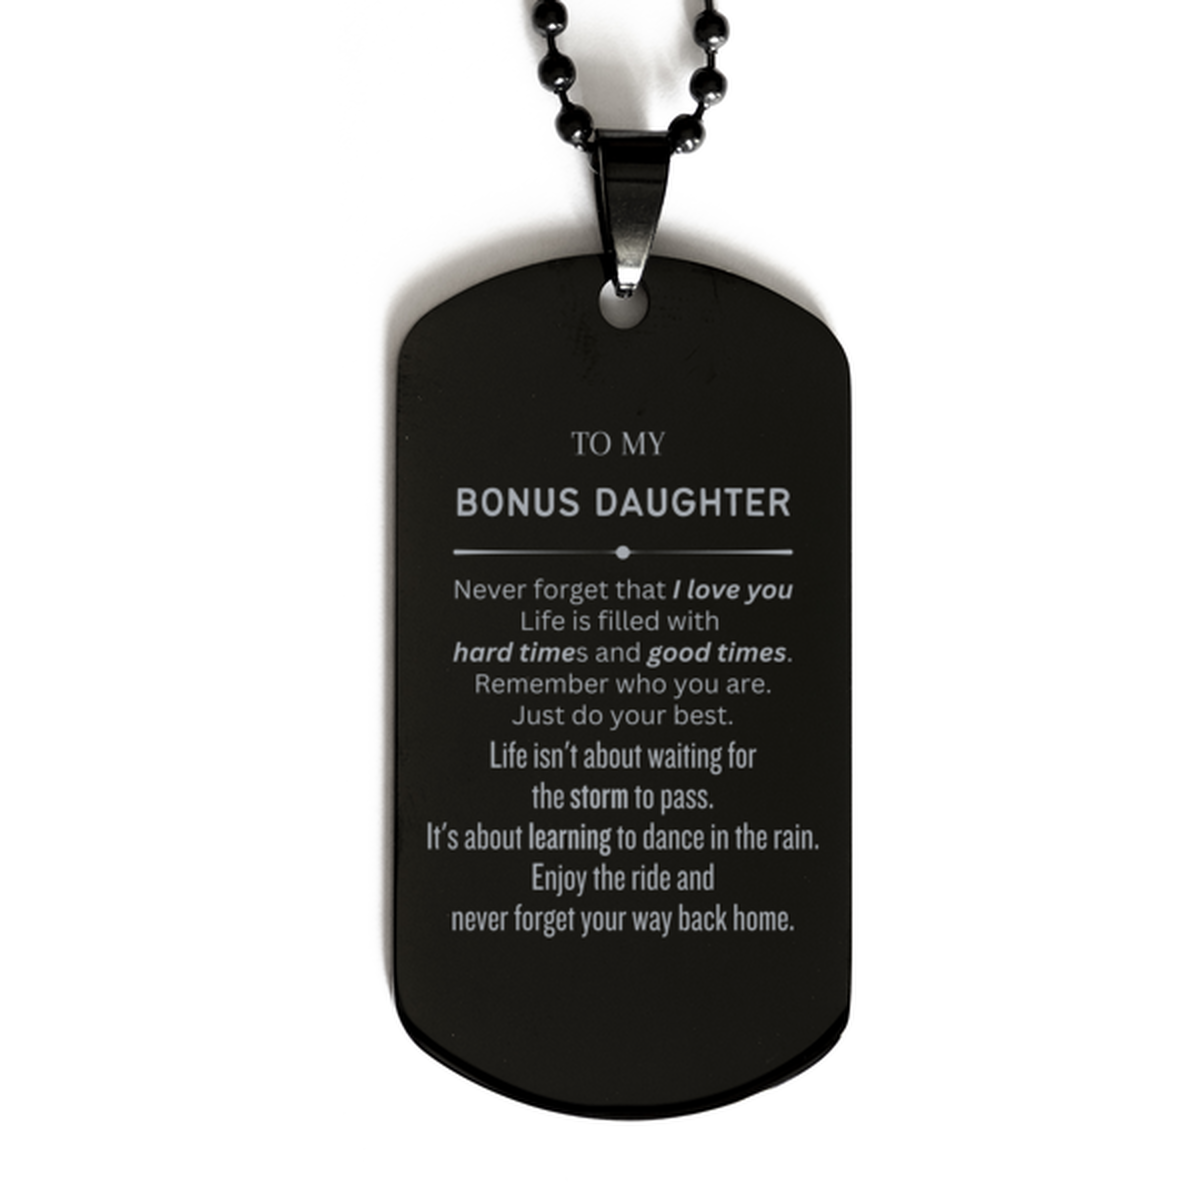 Christmas Bonus Daughter Black Dog Tag Gifts, To My Bonus Daughter Birthday Thank You Gifts For Bonus Daughter, Graduation Unique Gifts For Bonus Daughter To My Bonus Daughter Never forget that I love you life is filled with hard times and good times. Rem